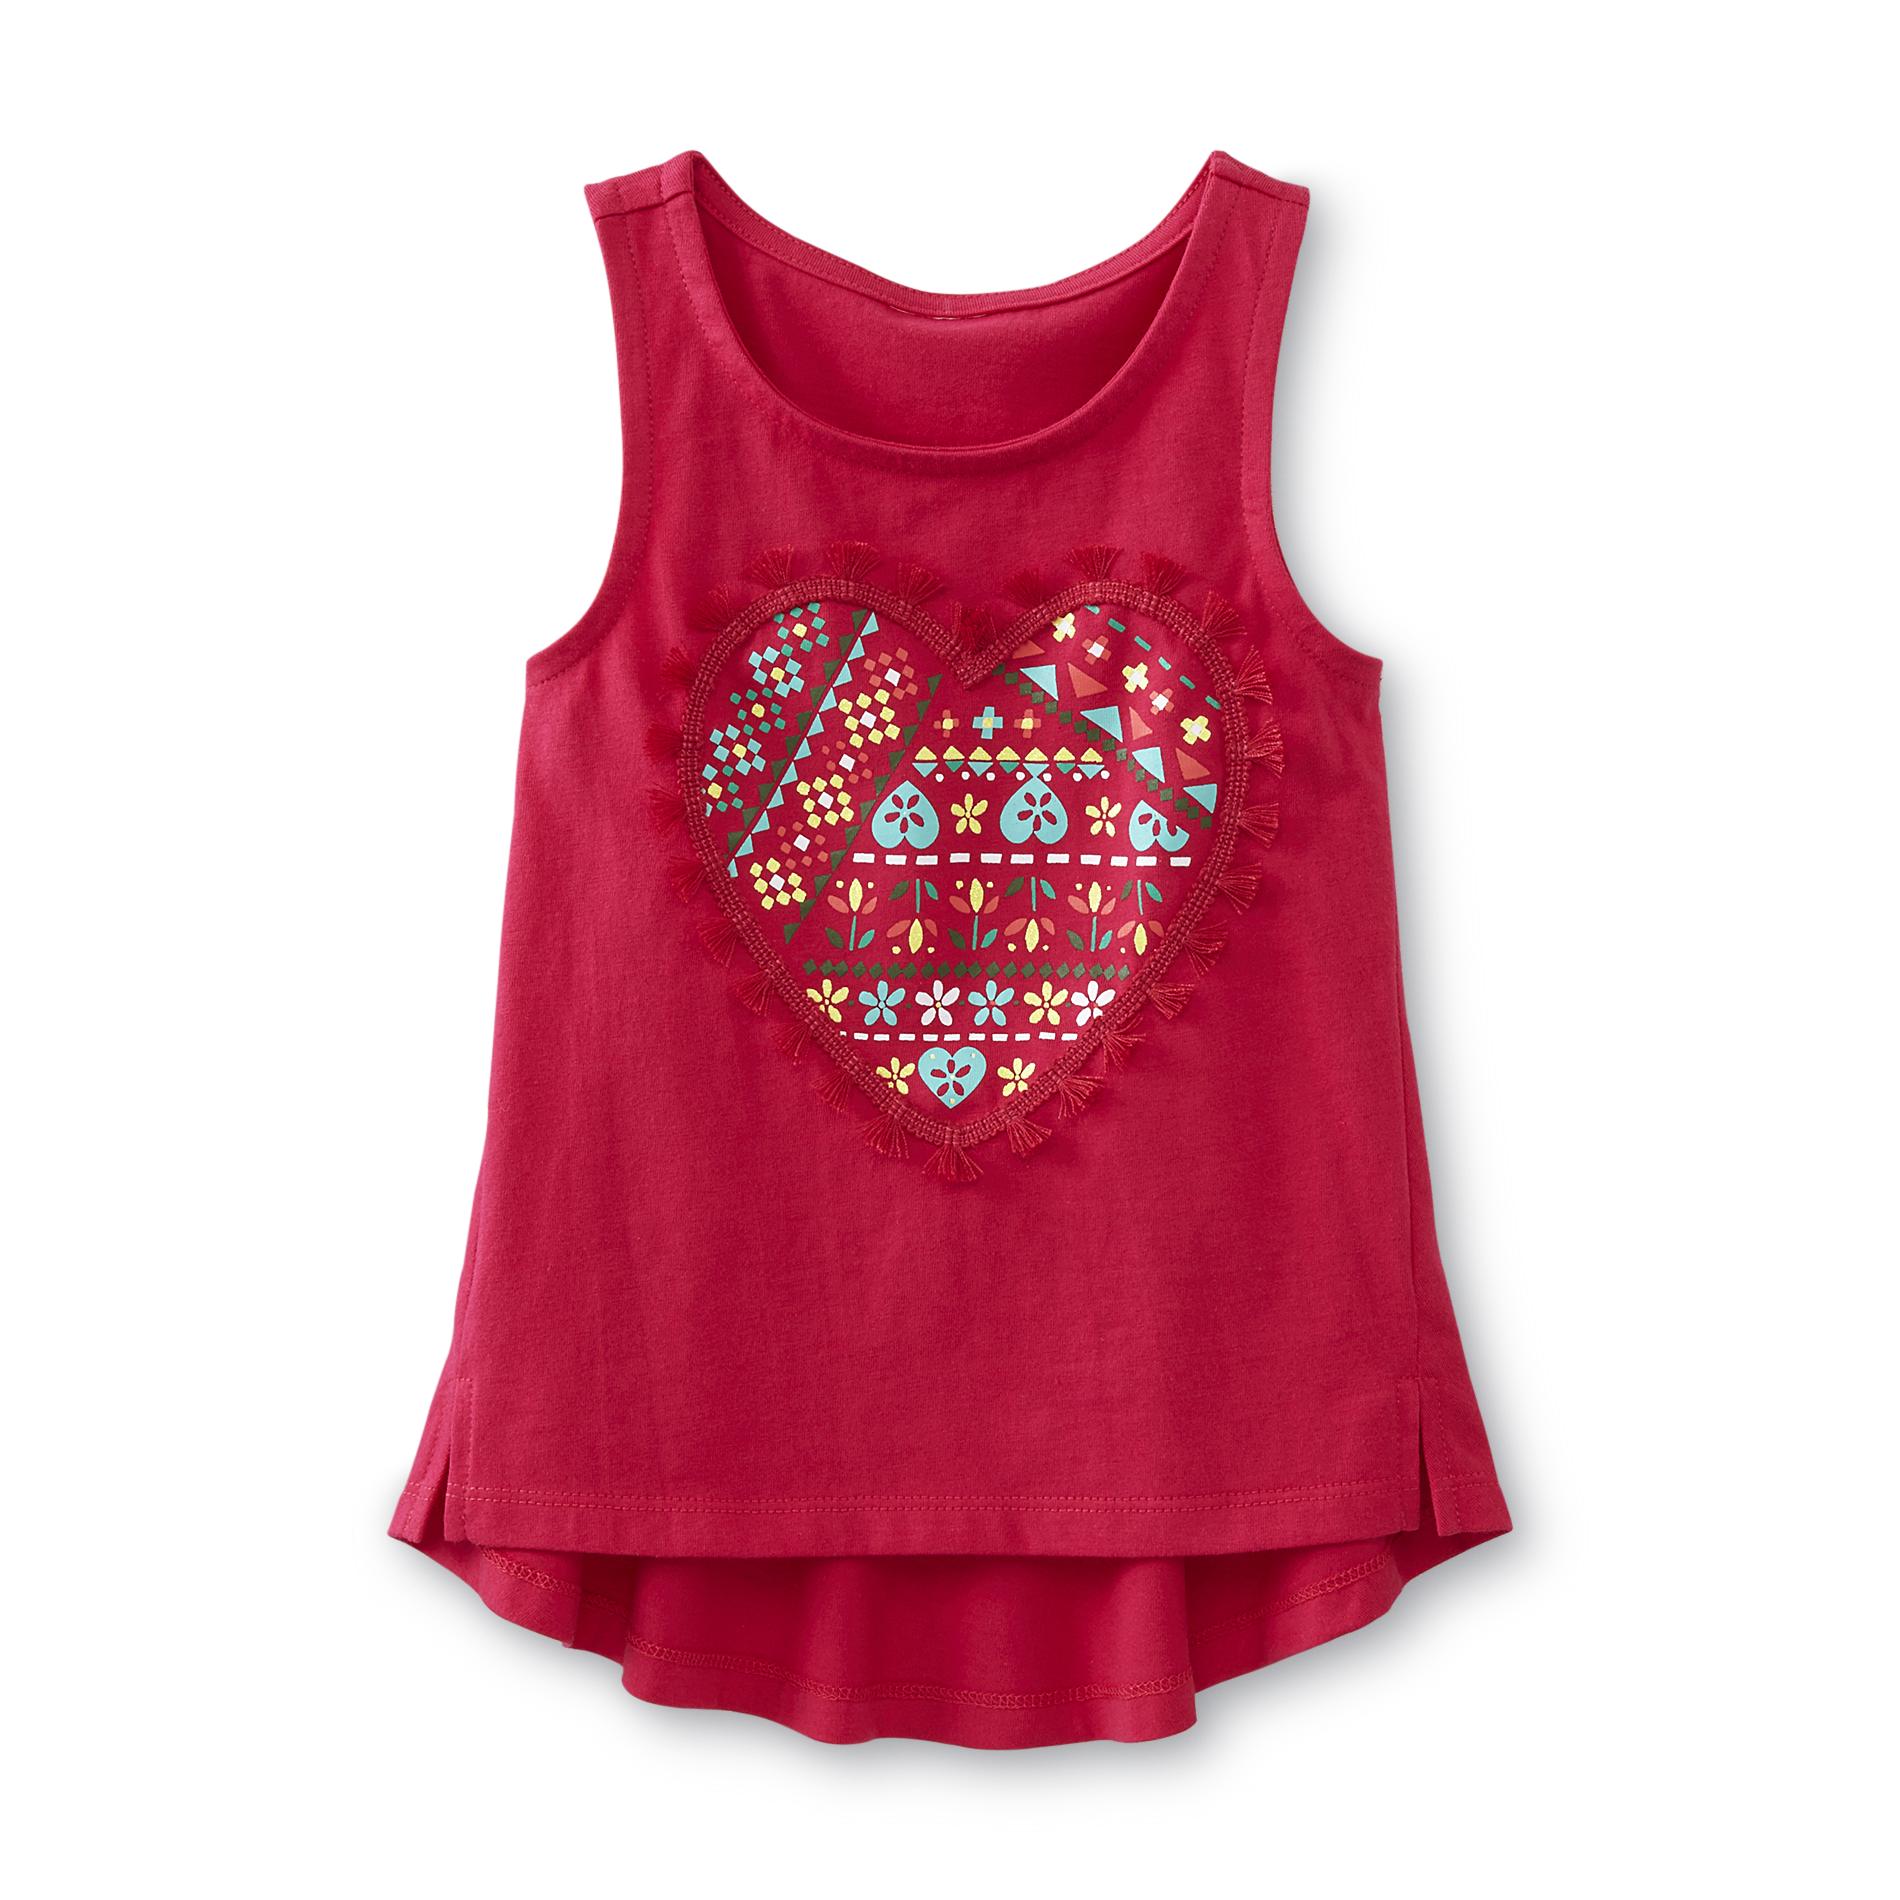 Toughskins Infant & Toddler Girl's Graphic Tank Top - Heart